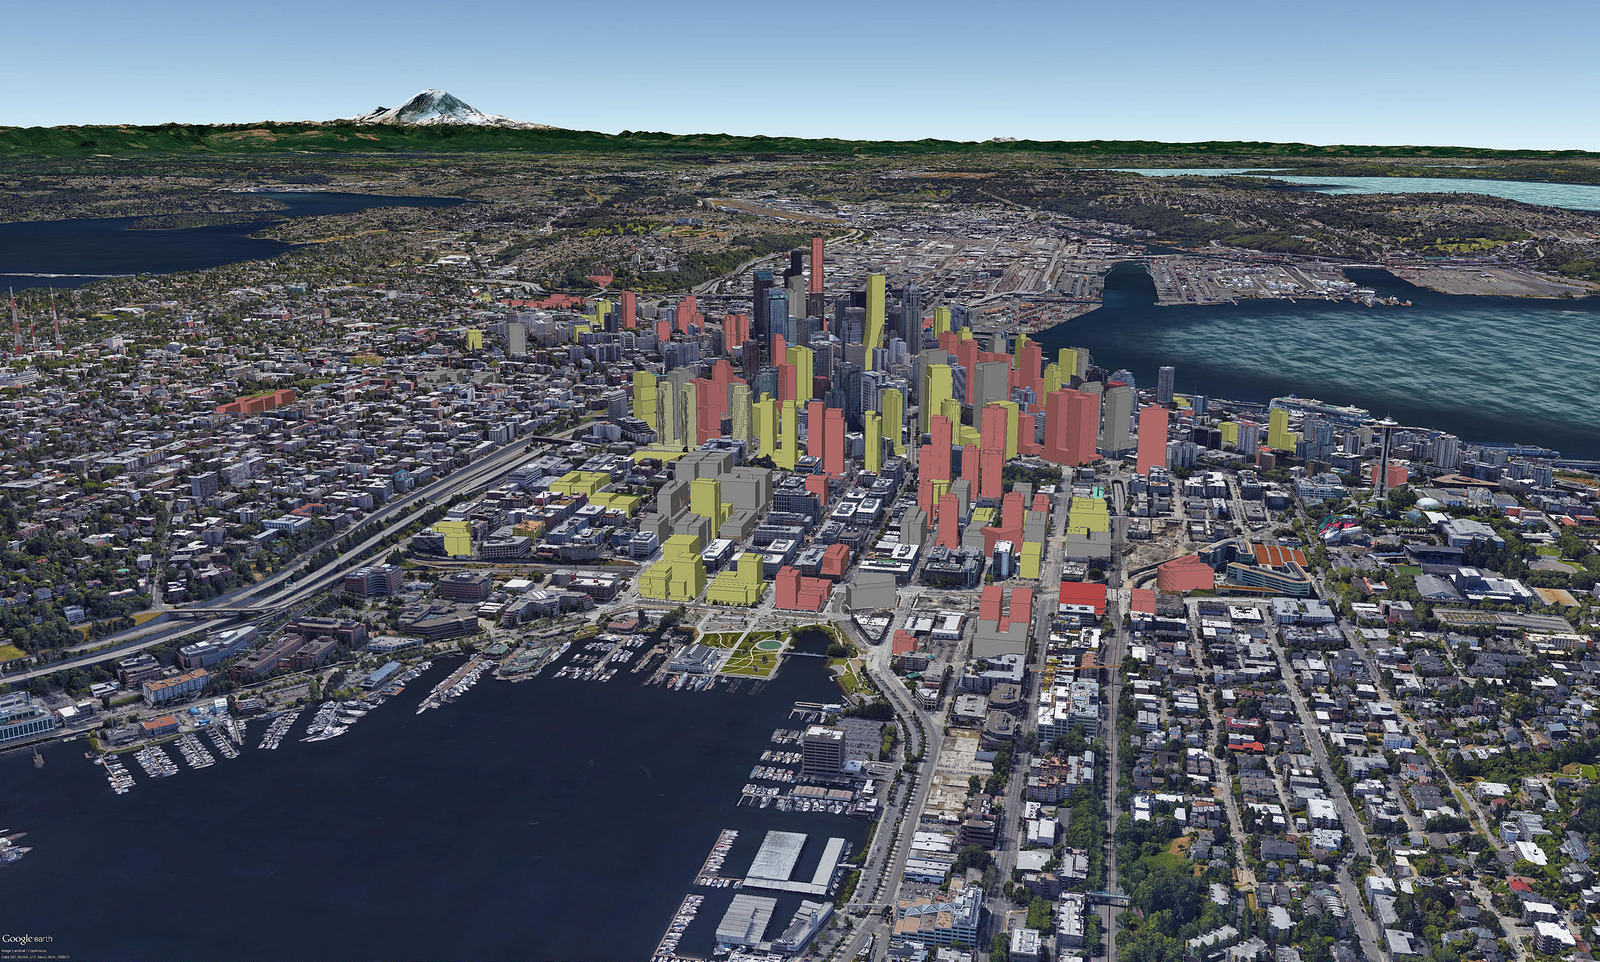 Rendering of South Lake Union with buildings currently under construction (yellow profiles), planned (salmon profiles), and completed (grey profiles). (David Boynton)